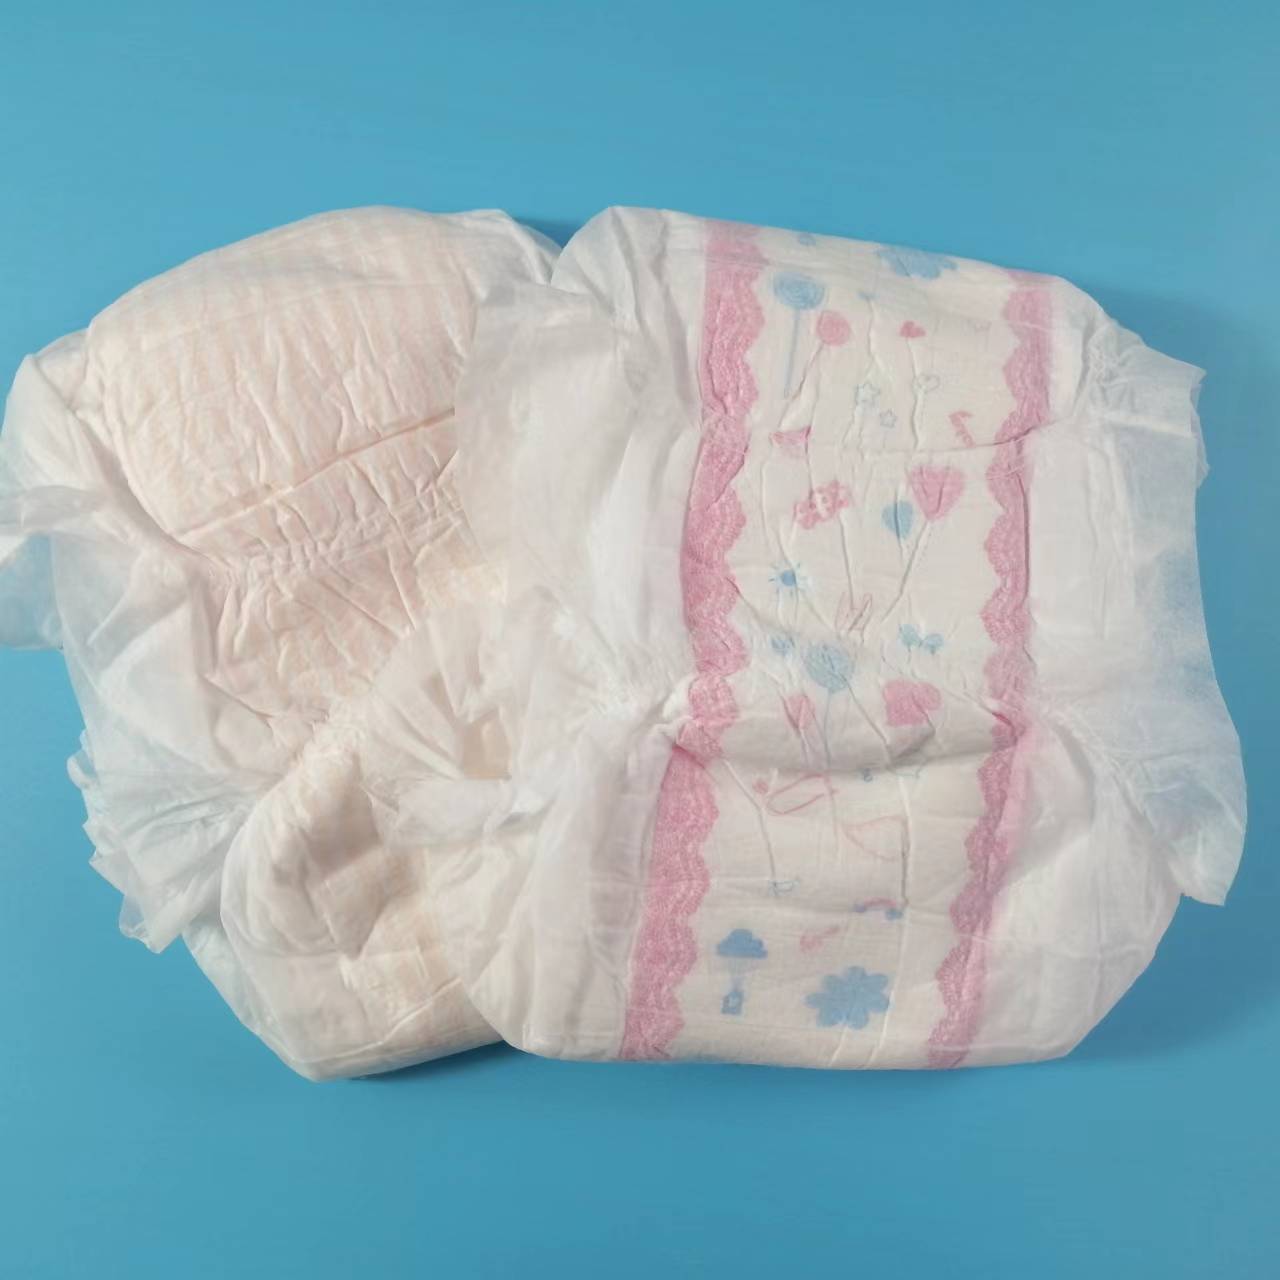 Cheap price high quality performance Sanitary Napkin panties type carefree soft healthy and comfortable fabric